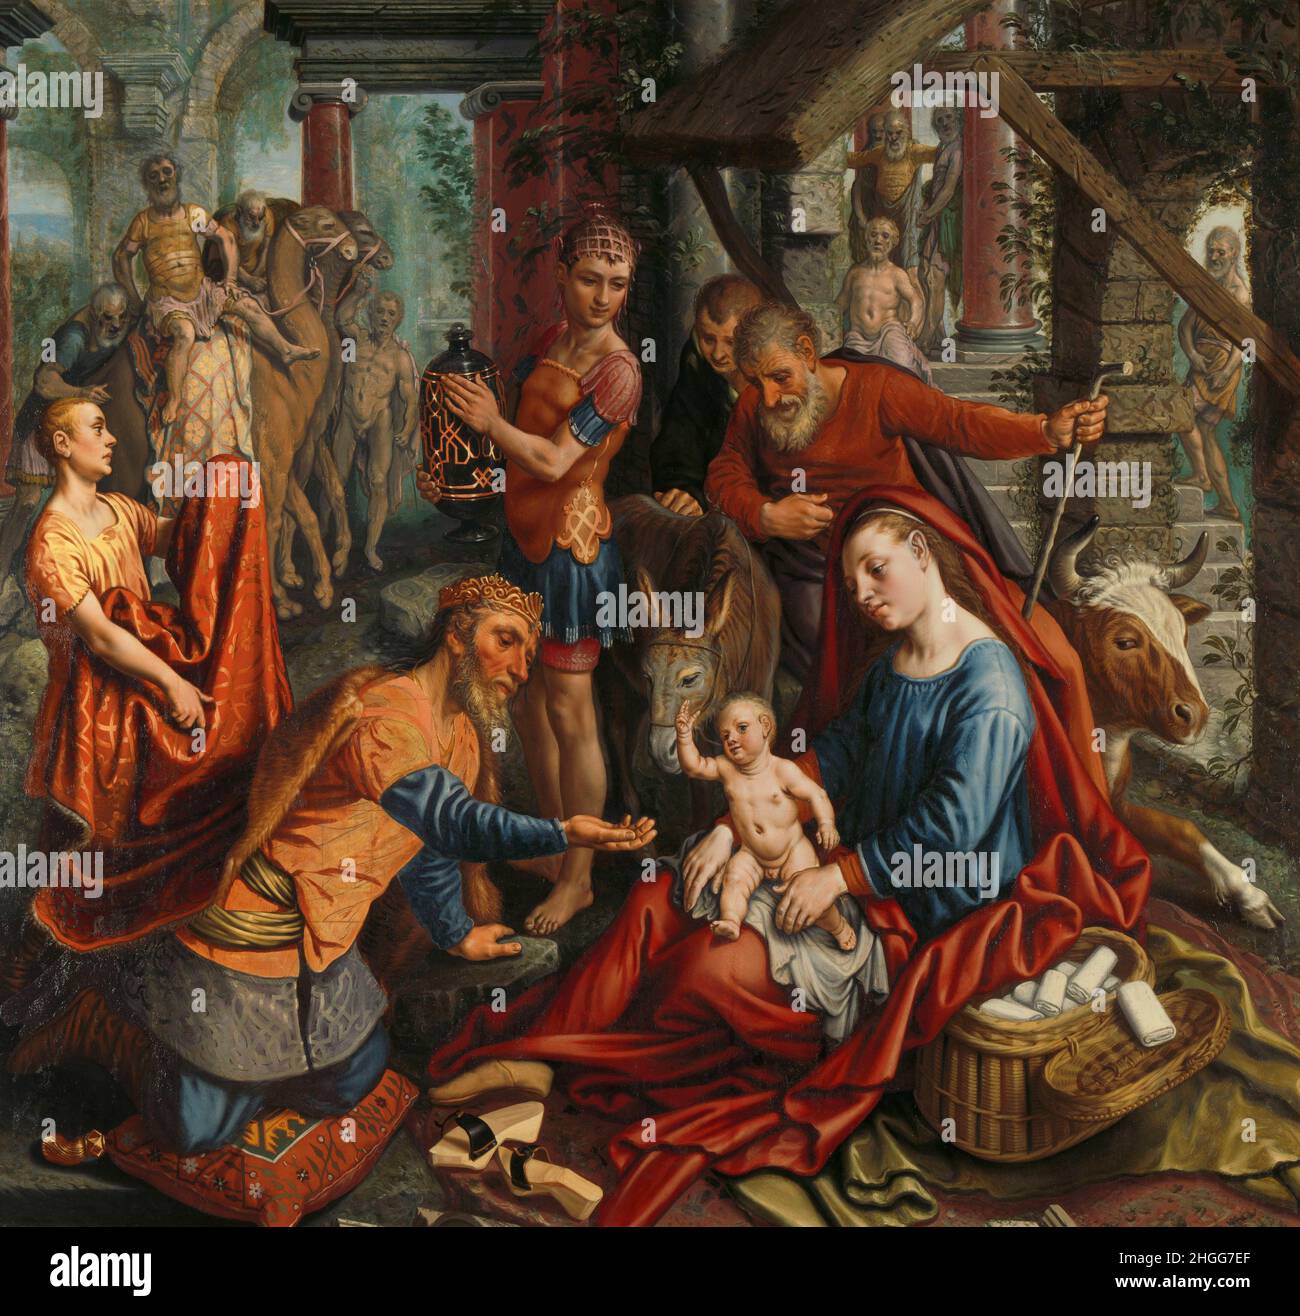 Netherlands/Middle East: 'The Adoration of the Magi'. Oil on panel painting by Pieter Aertsen (c. 1508 - 3 June 1575), 1560.  According to Christianity, the Three Kings, or Three Wise Men, travelled from the East to Bethlehem to pay homage to the newly born Messiah, the son of God. Cradled in his mother the Virgin Mary’s hands, the baby Jesus holds up his hand in a blessing. Before him kneels King Melchior, offering a gift of gold. Joseph, Mary's husband, stands behind in red. Stock Photo